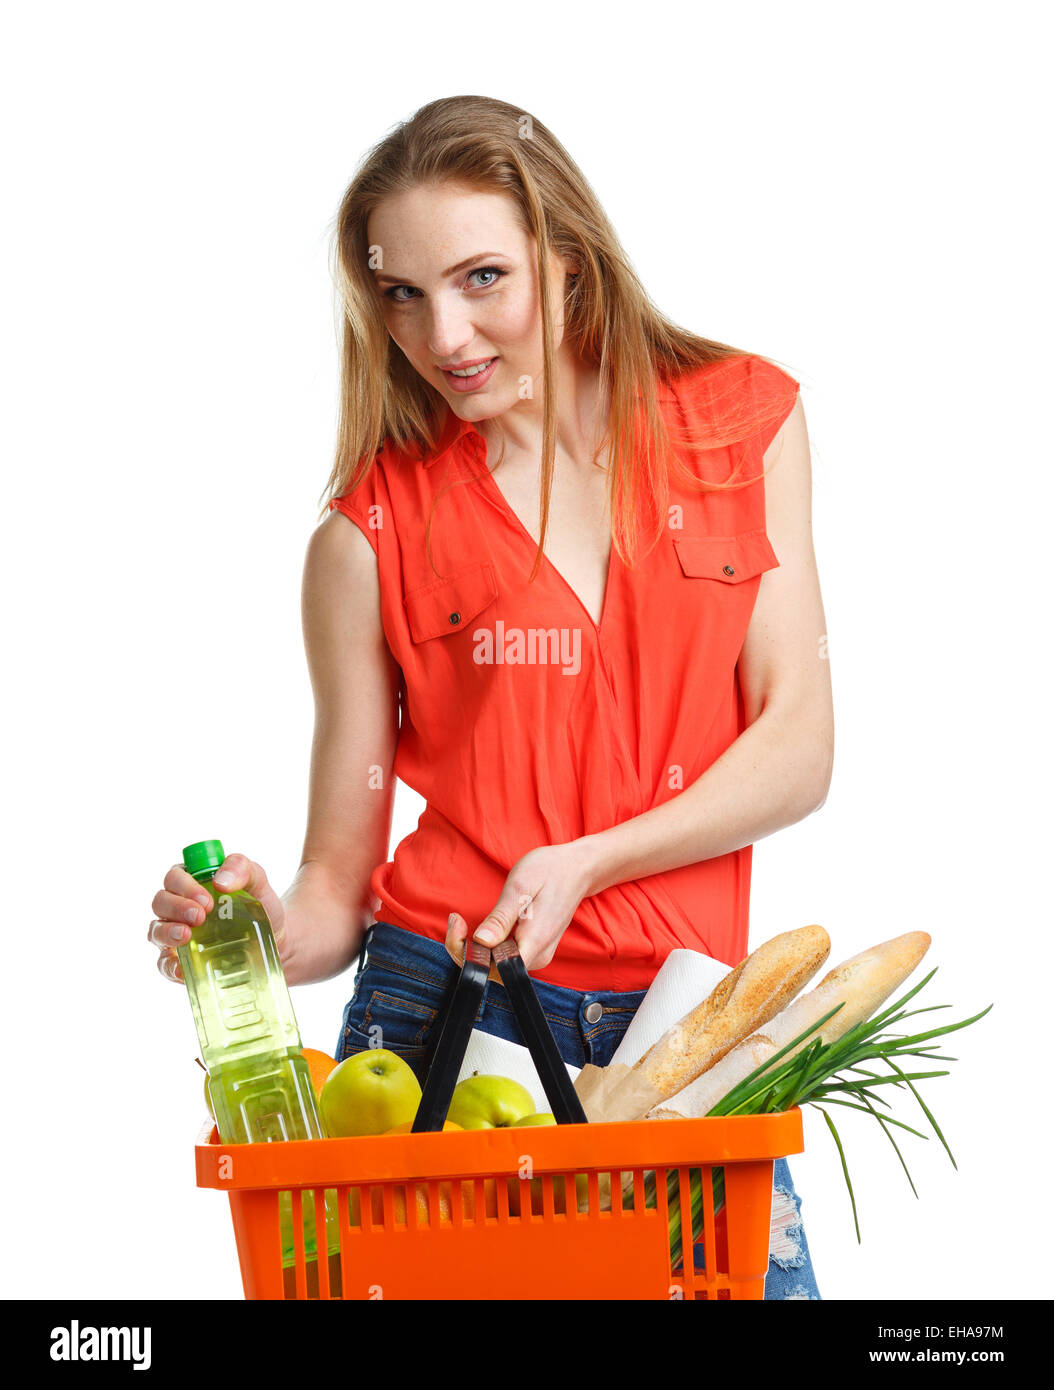 Young caucasian woman with assorted grocery products in shopping basket isolated on white background Stock Photo